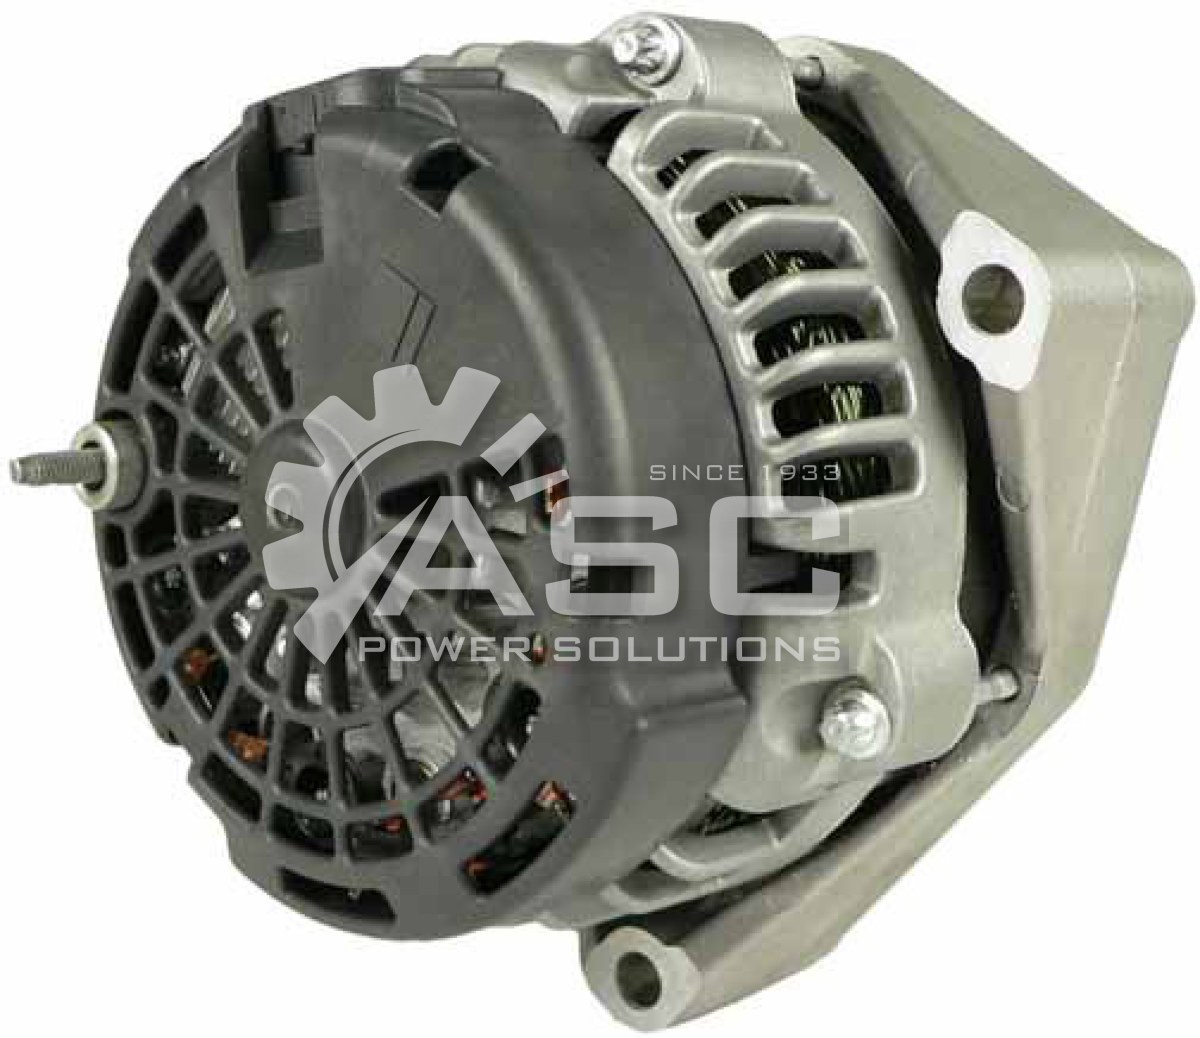 A121532_ASC POWER SOLUTIONS REMAN ALTERNATOR DR44G 12V 145AMP INCLUDES 6 GROOVE CLUTCH PULLEY